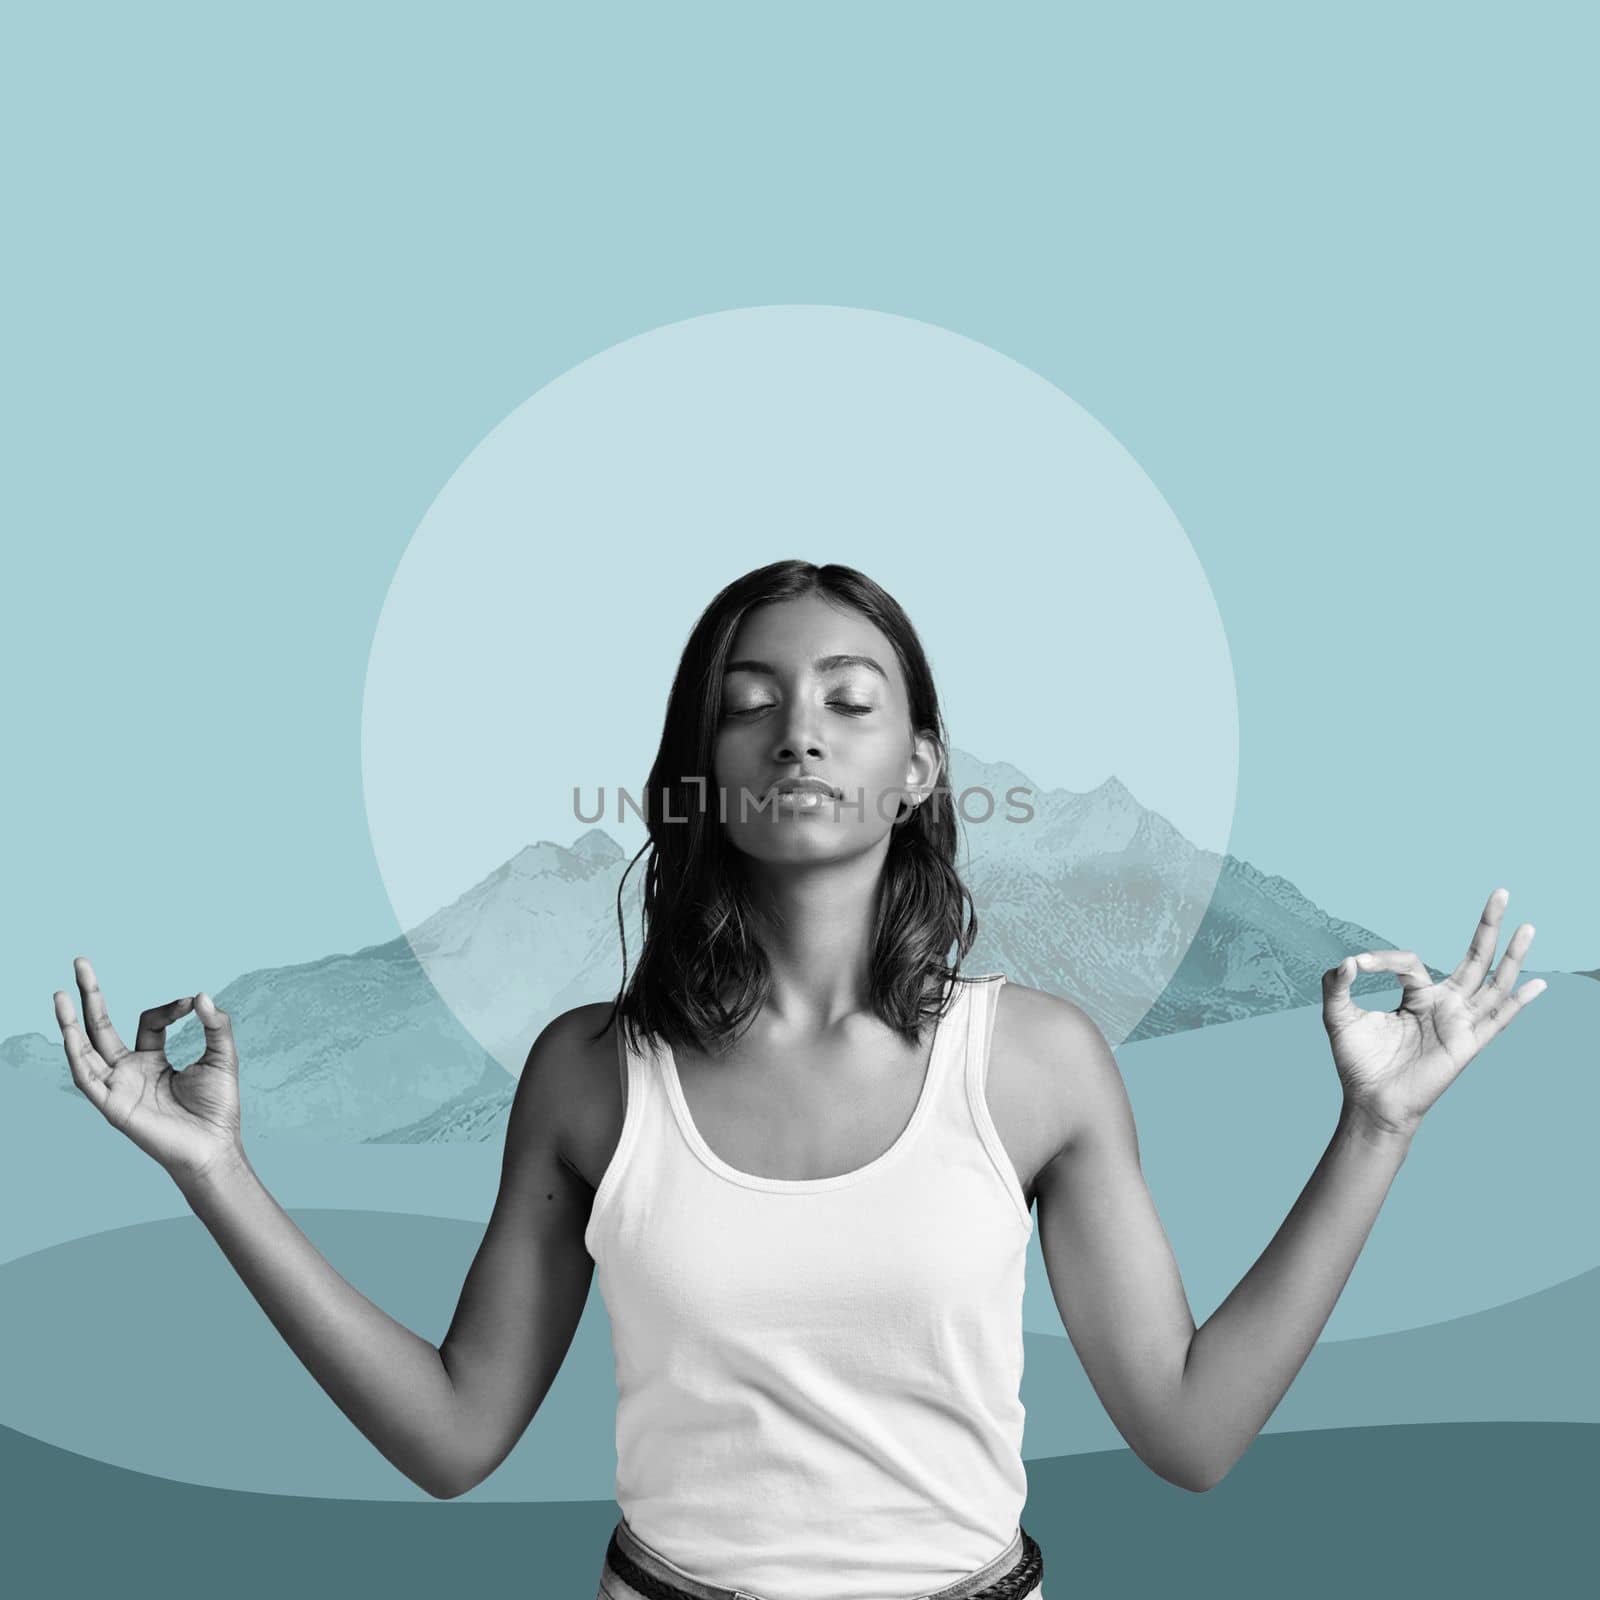 Zen, meditation and woman on poster, mountain on blue background and lotus pose in balance. Art, yoga advertising and creative collage design for health, wellness and calm, spiritual lifestyle studio.